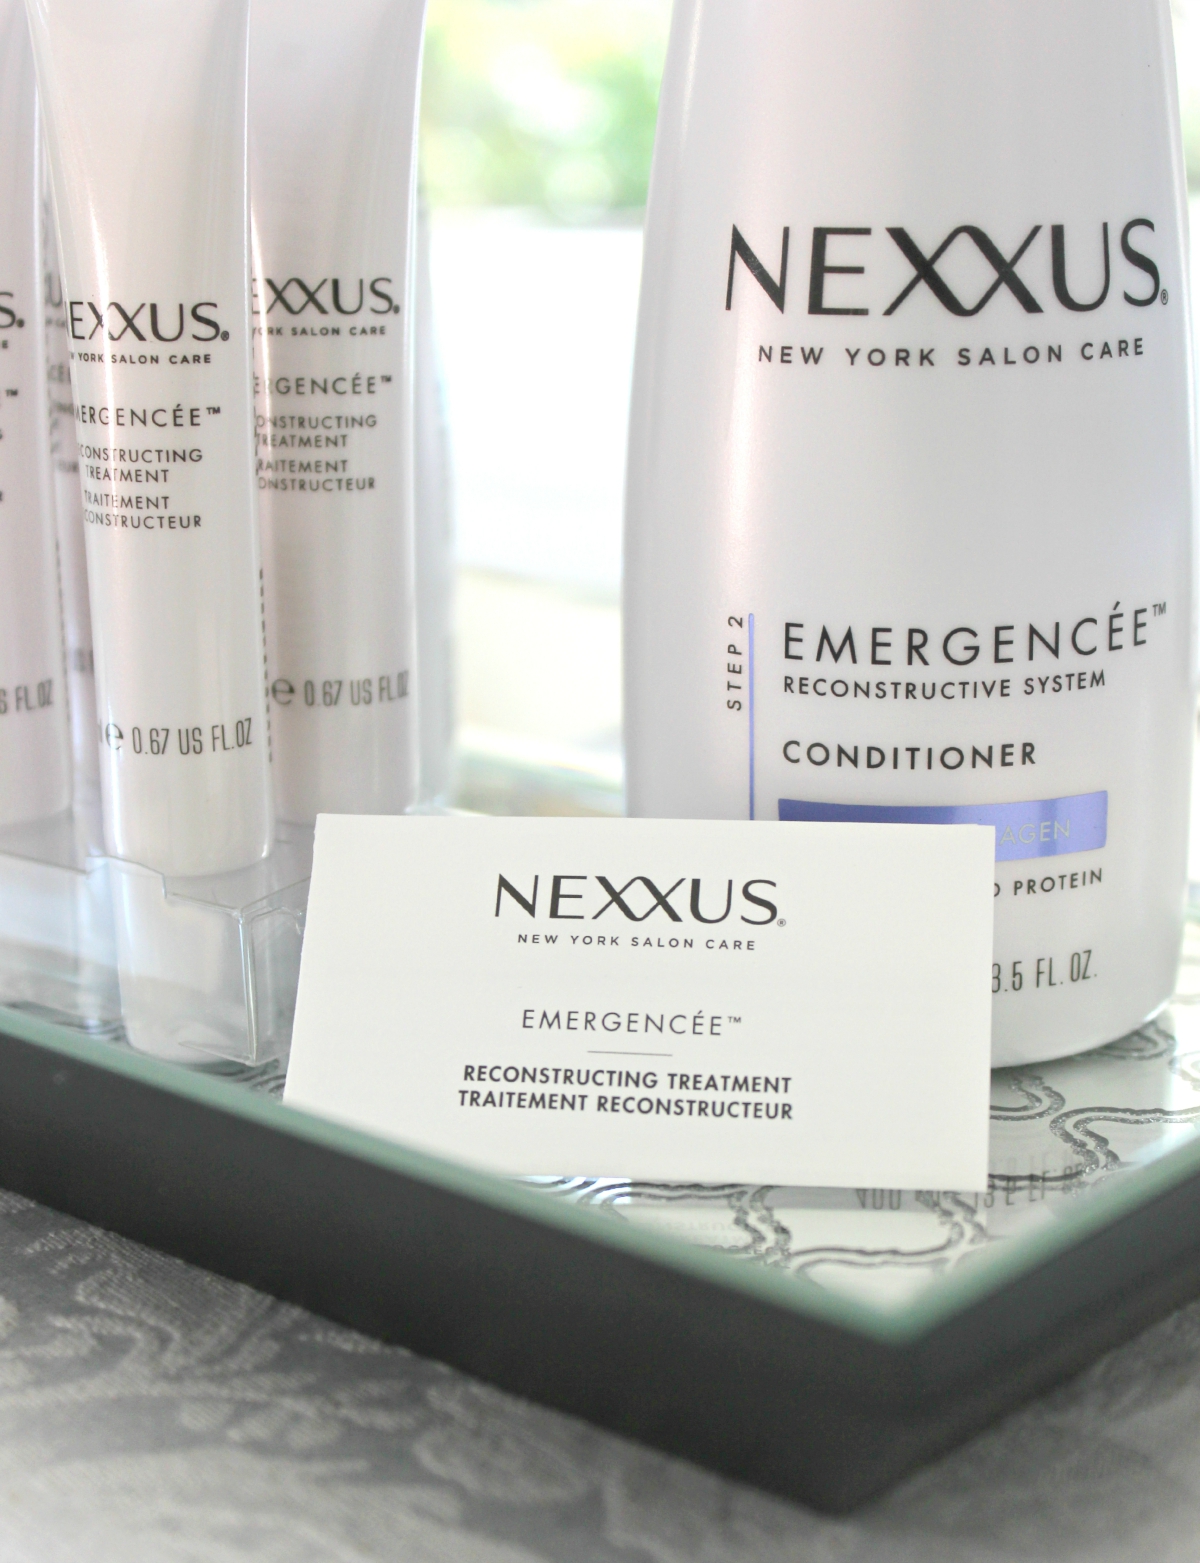 An honest review of the Nexxus Emergencee line by a former pageant girl, Nexxus Emergencee Review by southern fashion blogger Stephanie Ziajka from Diary of a Debutante